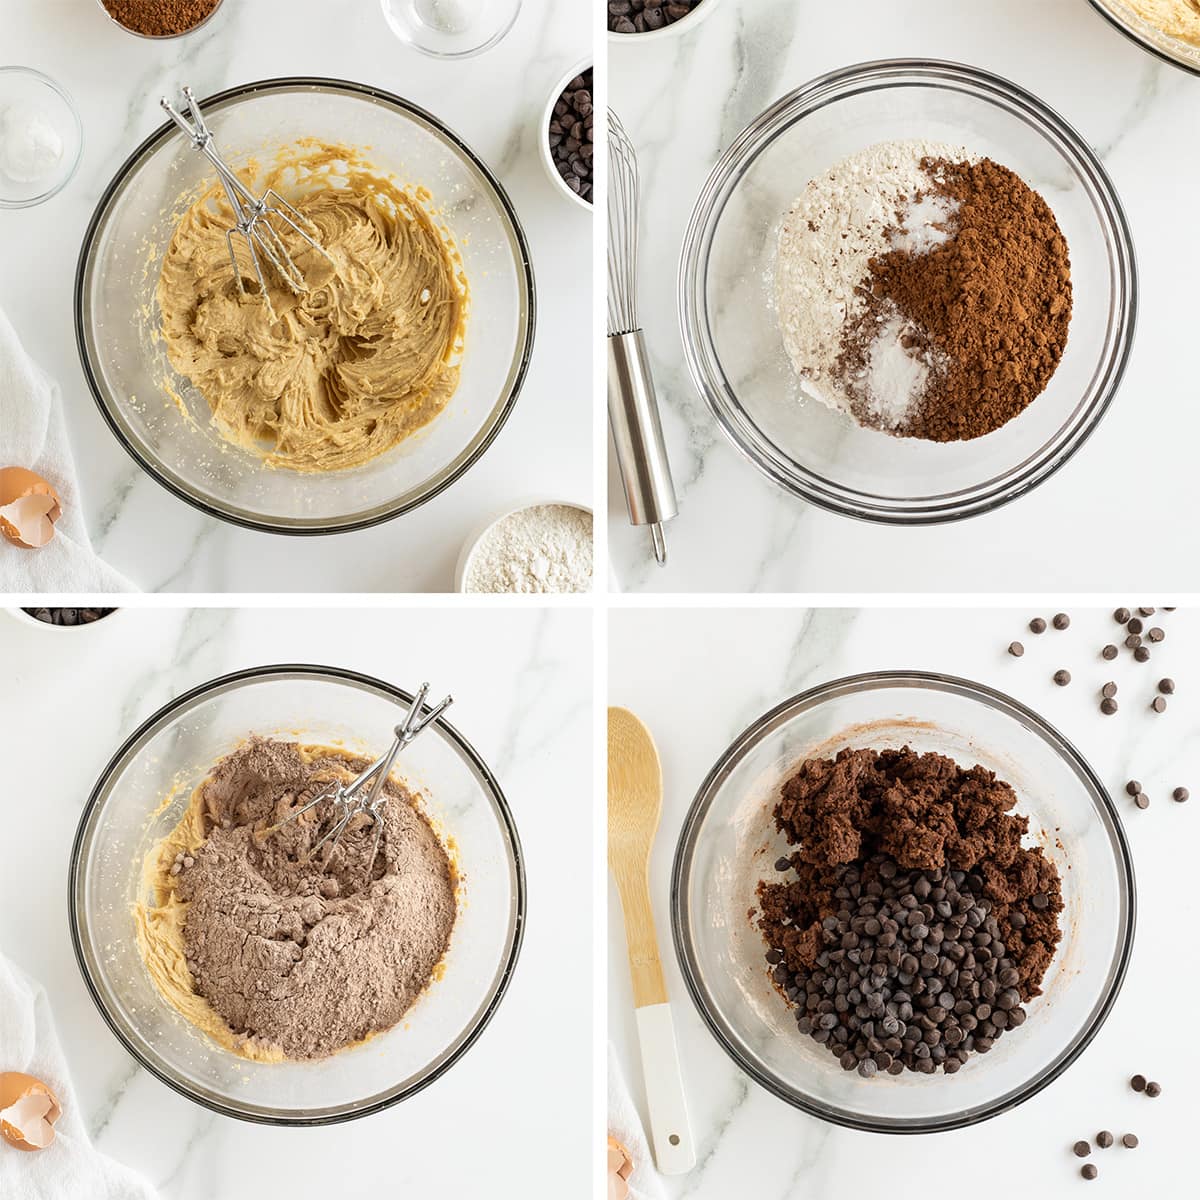 Four images of ingredients for cookie dough being combined in a glass bowl.